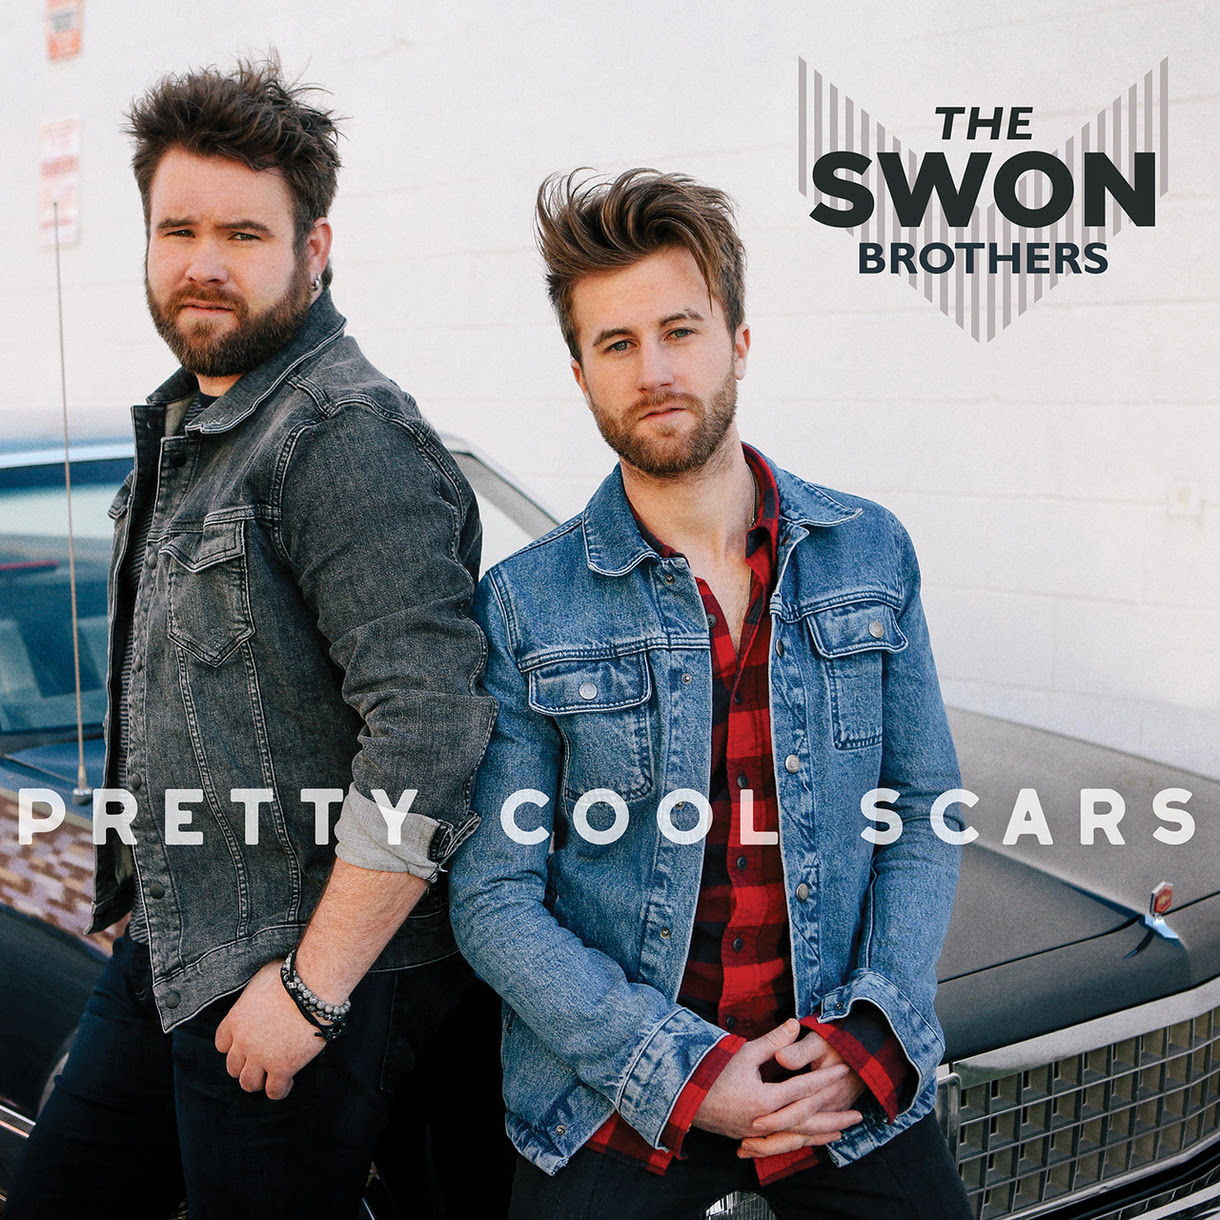 The Swon Brothers Announce New EP “Pretty Cool Scars” – Out March 17th